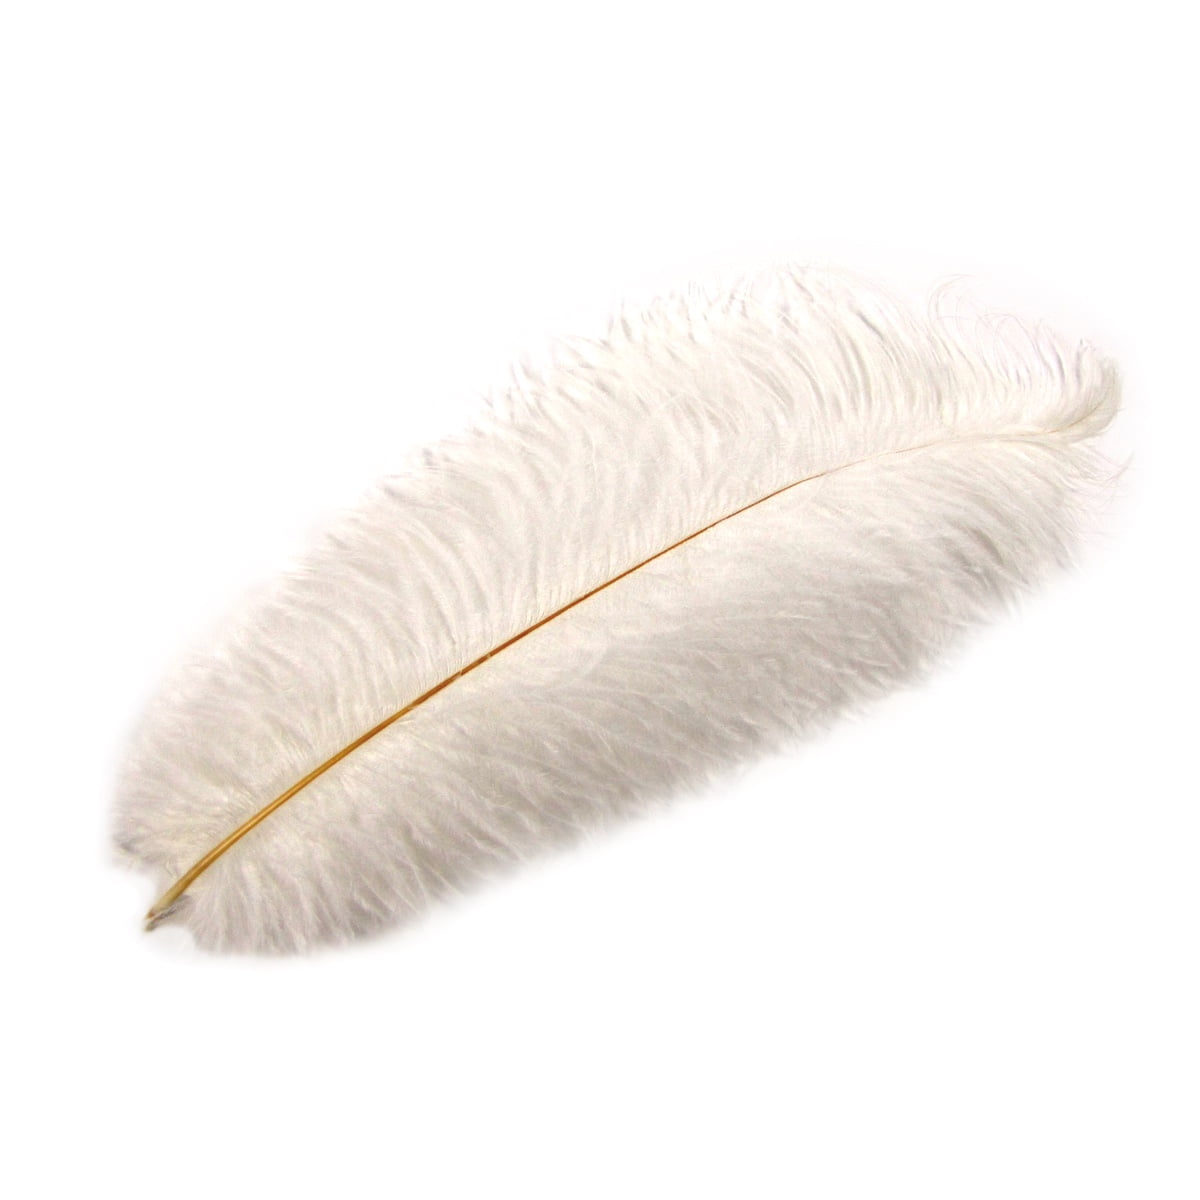 Hello Hobby White Feathers - Arts and Craft - 4.75 x 0.67 x 7.75